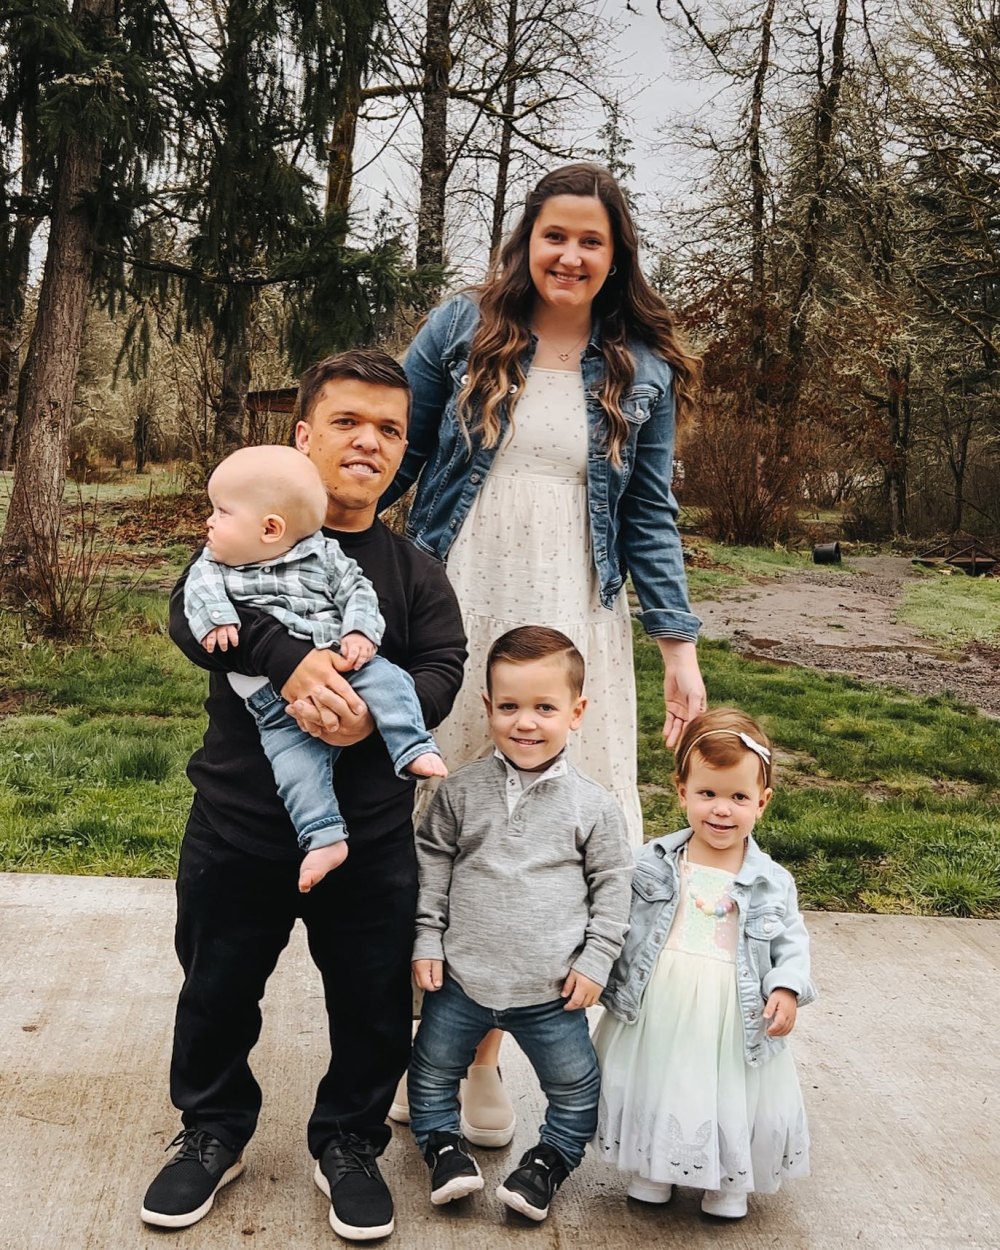 Zach and Tori Roloff Talk About Possibility of Homeschooling Their 3 Kids Every Child Is Different